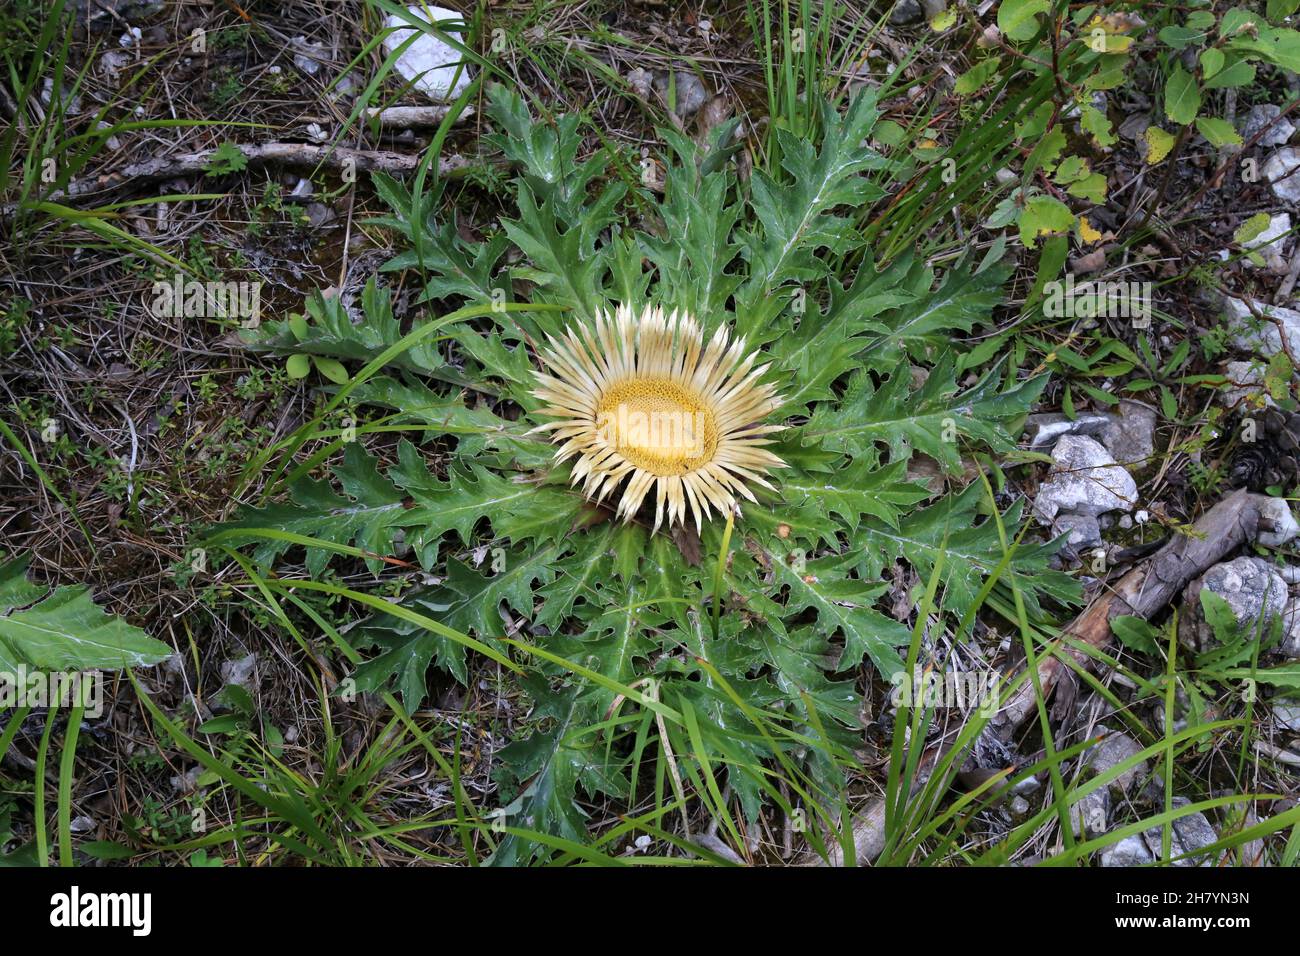 Carlina acanthifolia, Acanthus-Leaved Carline Thistle, Compositae. Wild plant shot in summer. Stock Photo